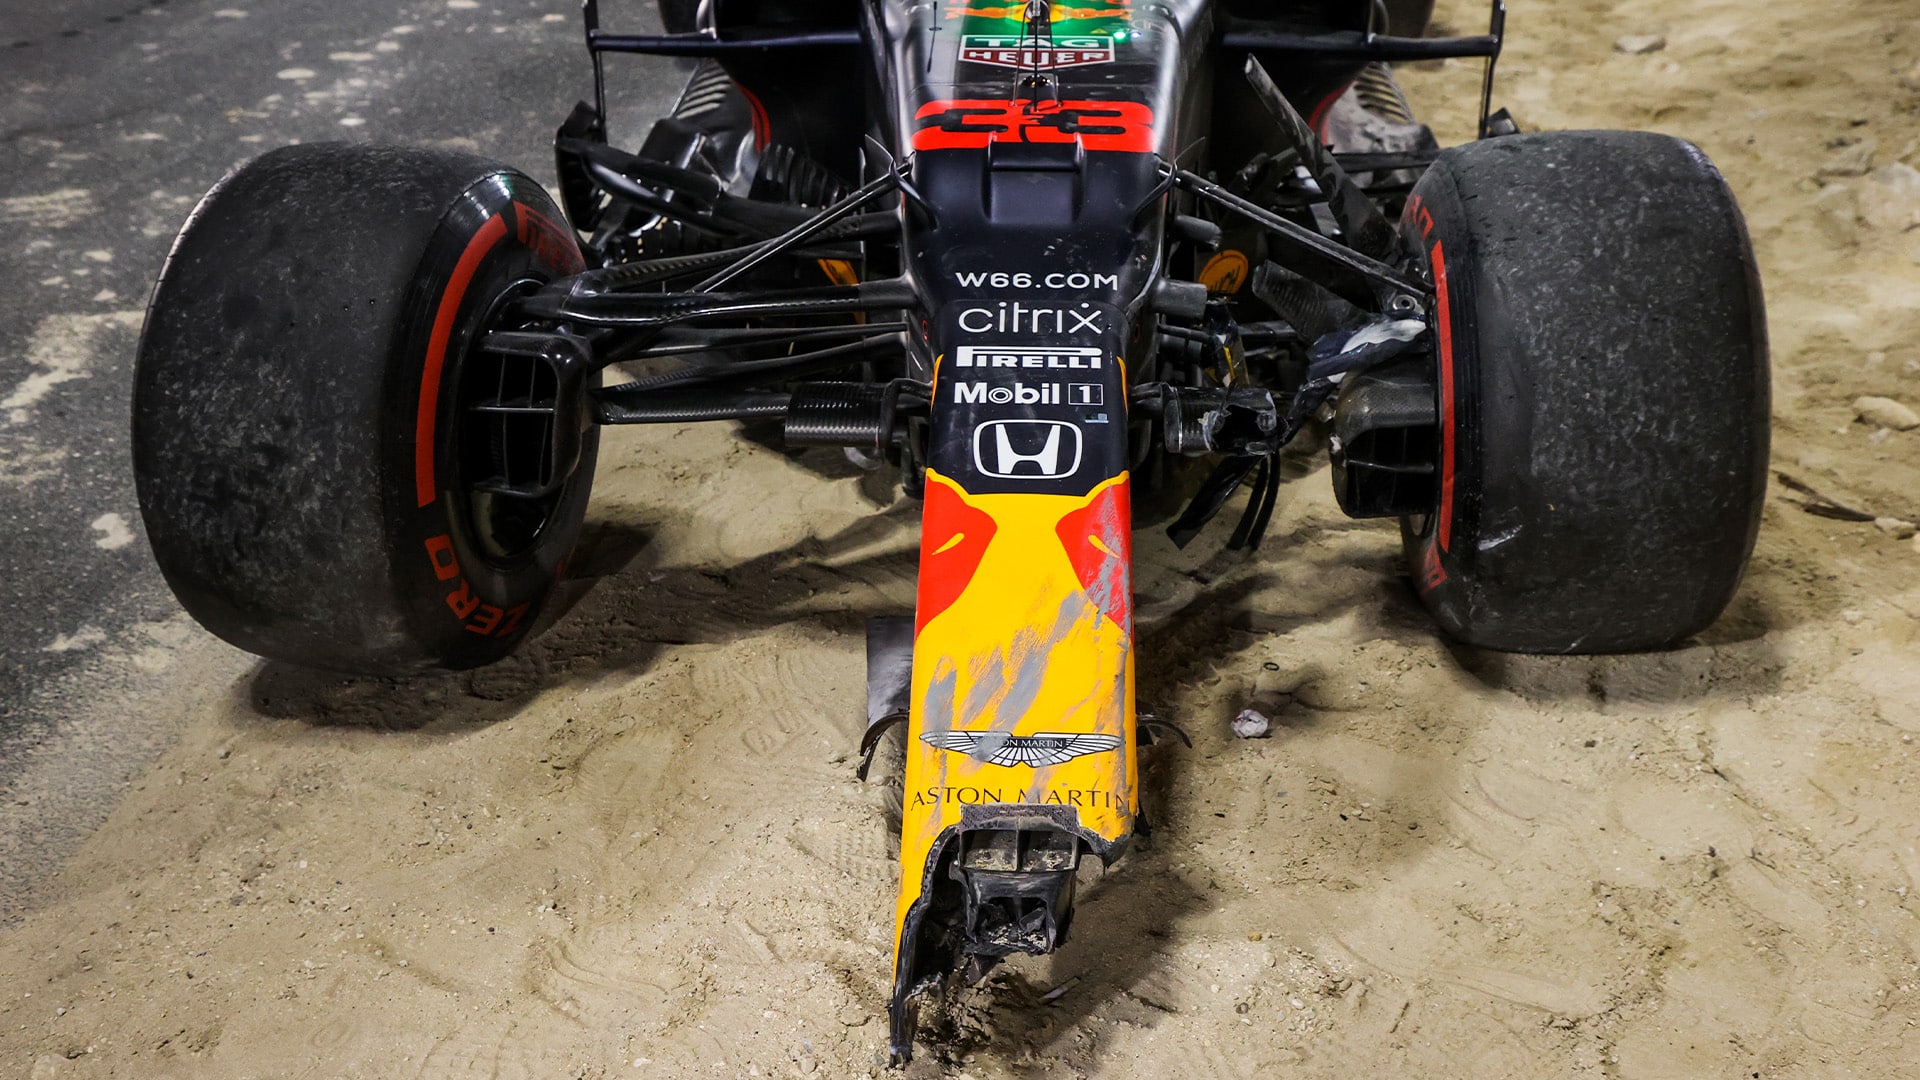 Verstappen's damaged Red Bull after crashing with at the Sakhir Grand Prix